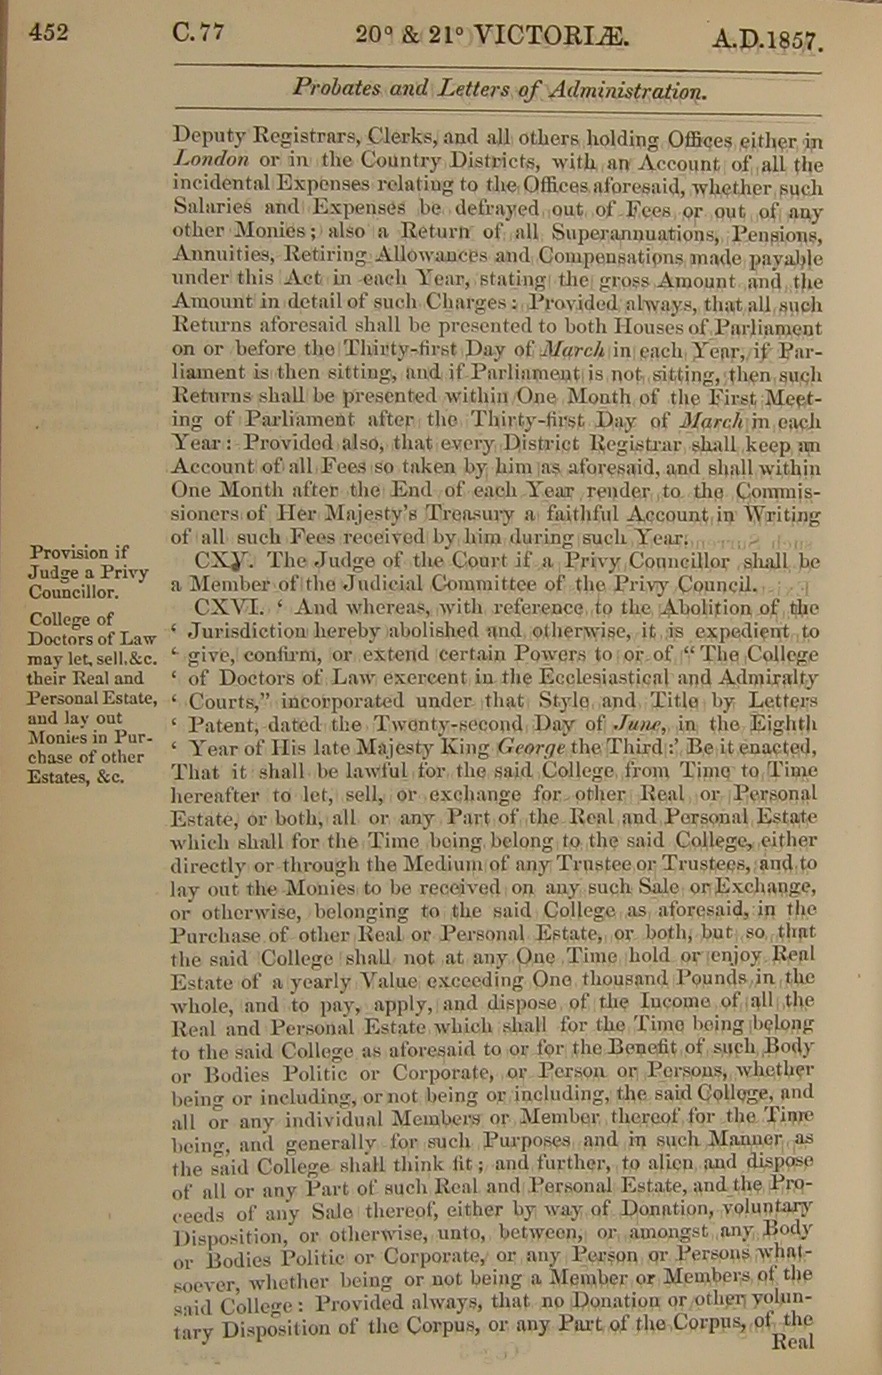 Image of 20 & 21 Victoria I, c. 77 (page 31 of 34). Click for larger image.